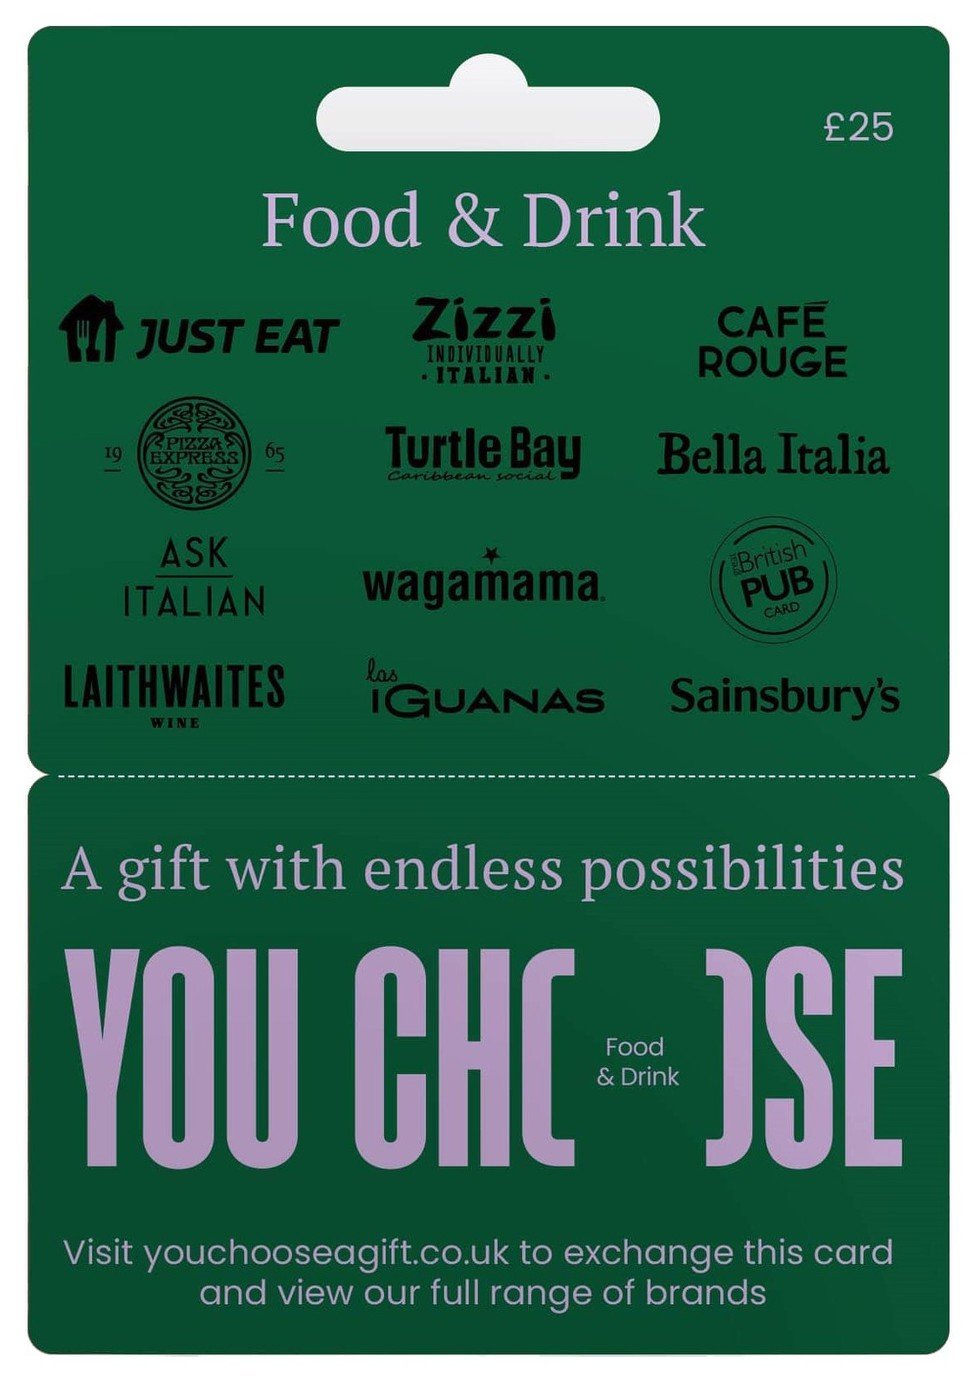 You Choose Food & Drink 25 GBP Gift Card